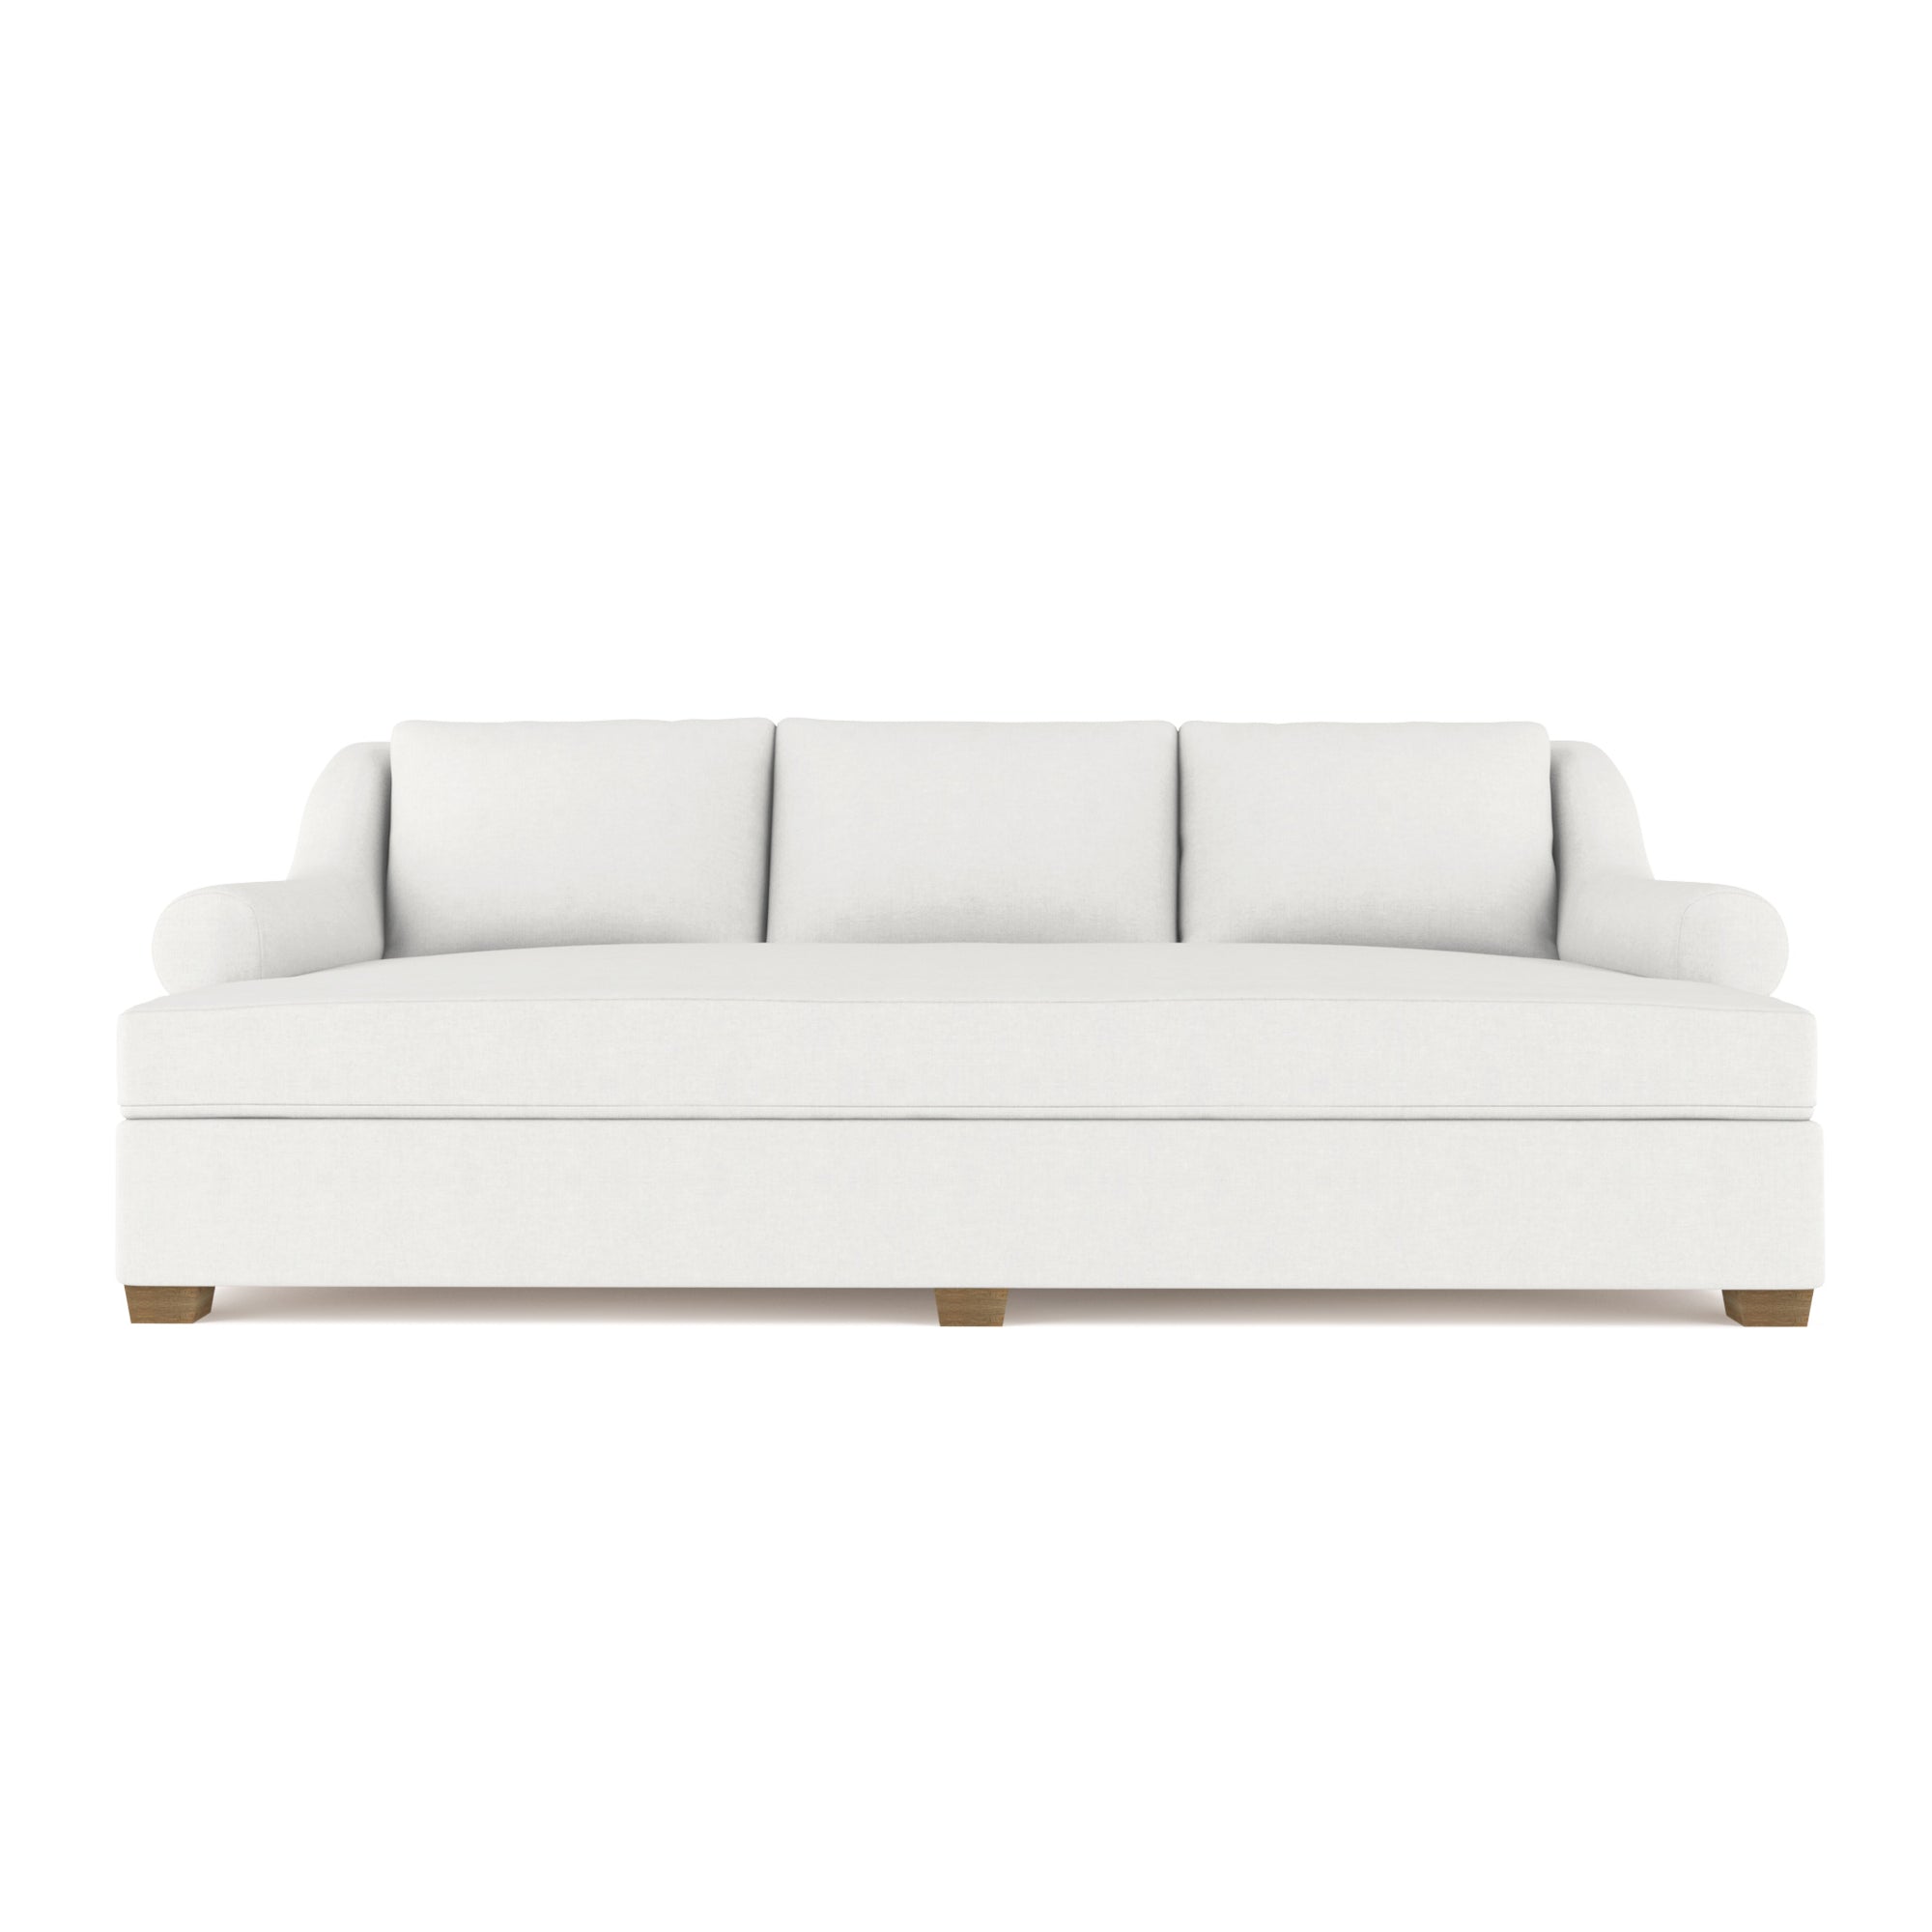 Thompson Daybed - Blanc Box Weave Linen